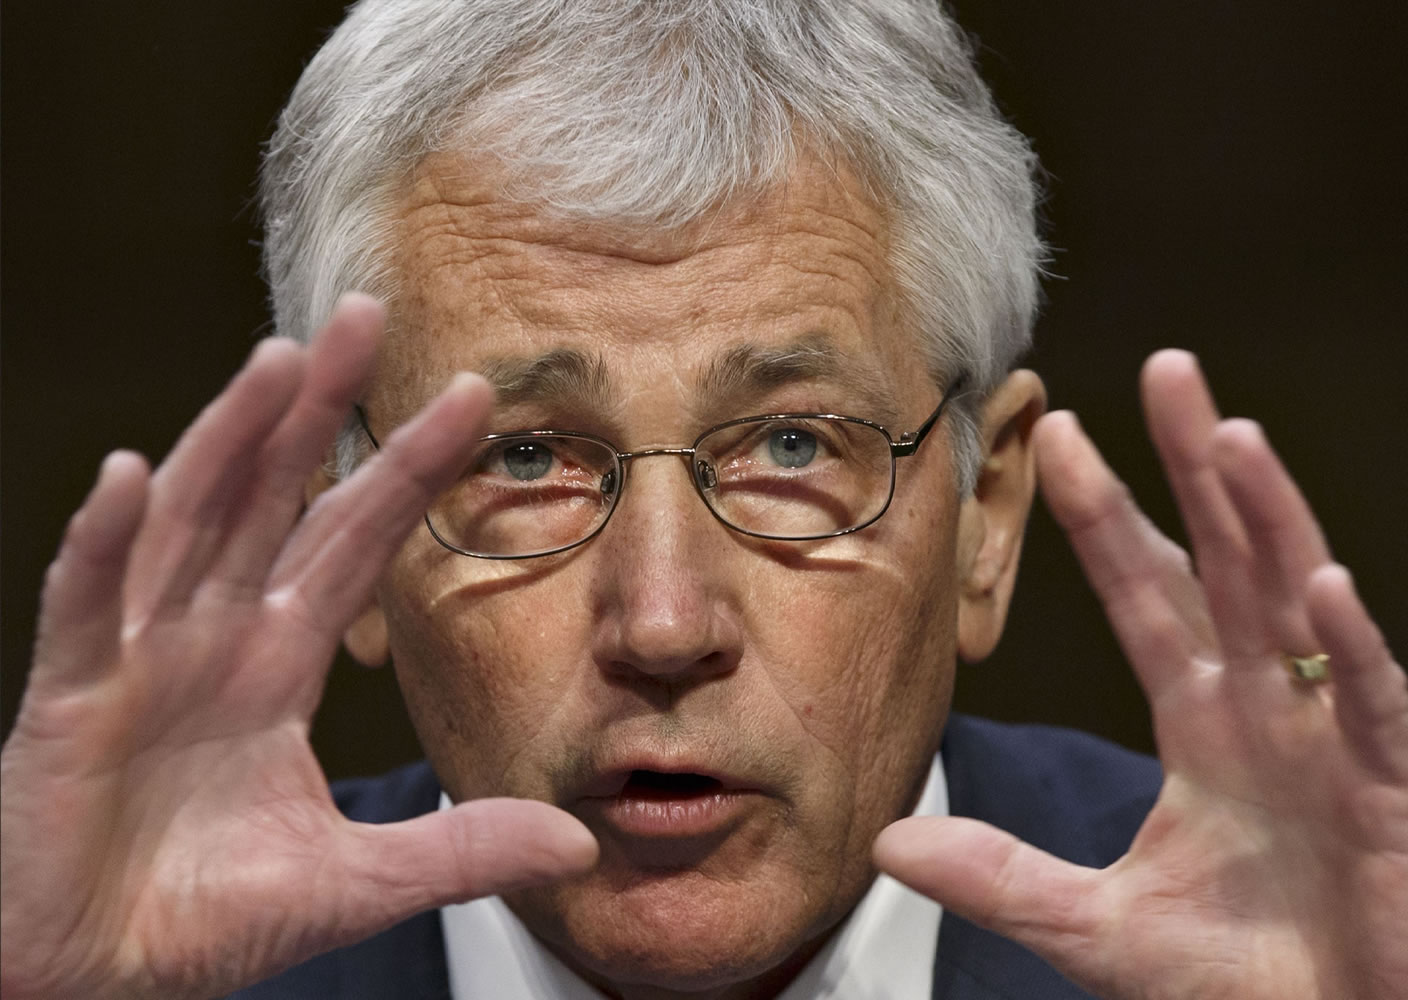 Defense Secretary Chuck Hagel testifies on Capitol Hill in Washington on Wednesday before the Senate Armed Services Committee hearing on the Defense Departmentis budget request for fiscal year 2015. In response to Russia's takeover of Ukraine's Crimean Peninsula, Hagel said the U.S.